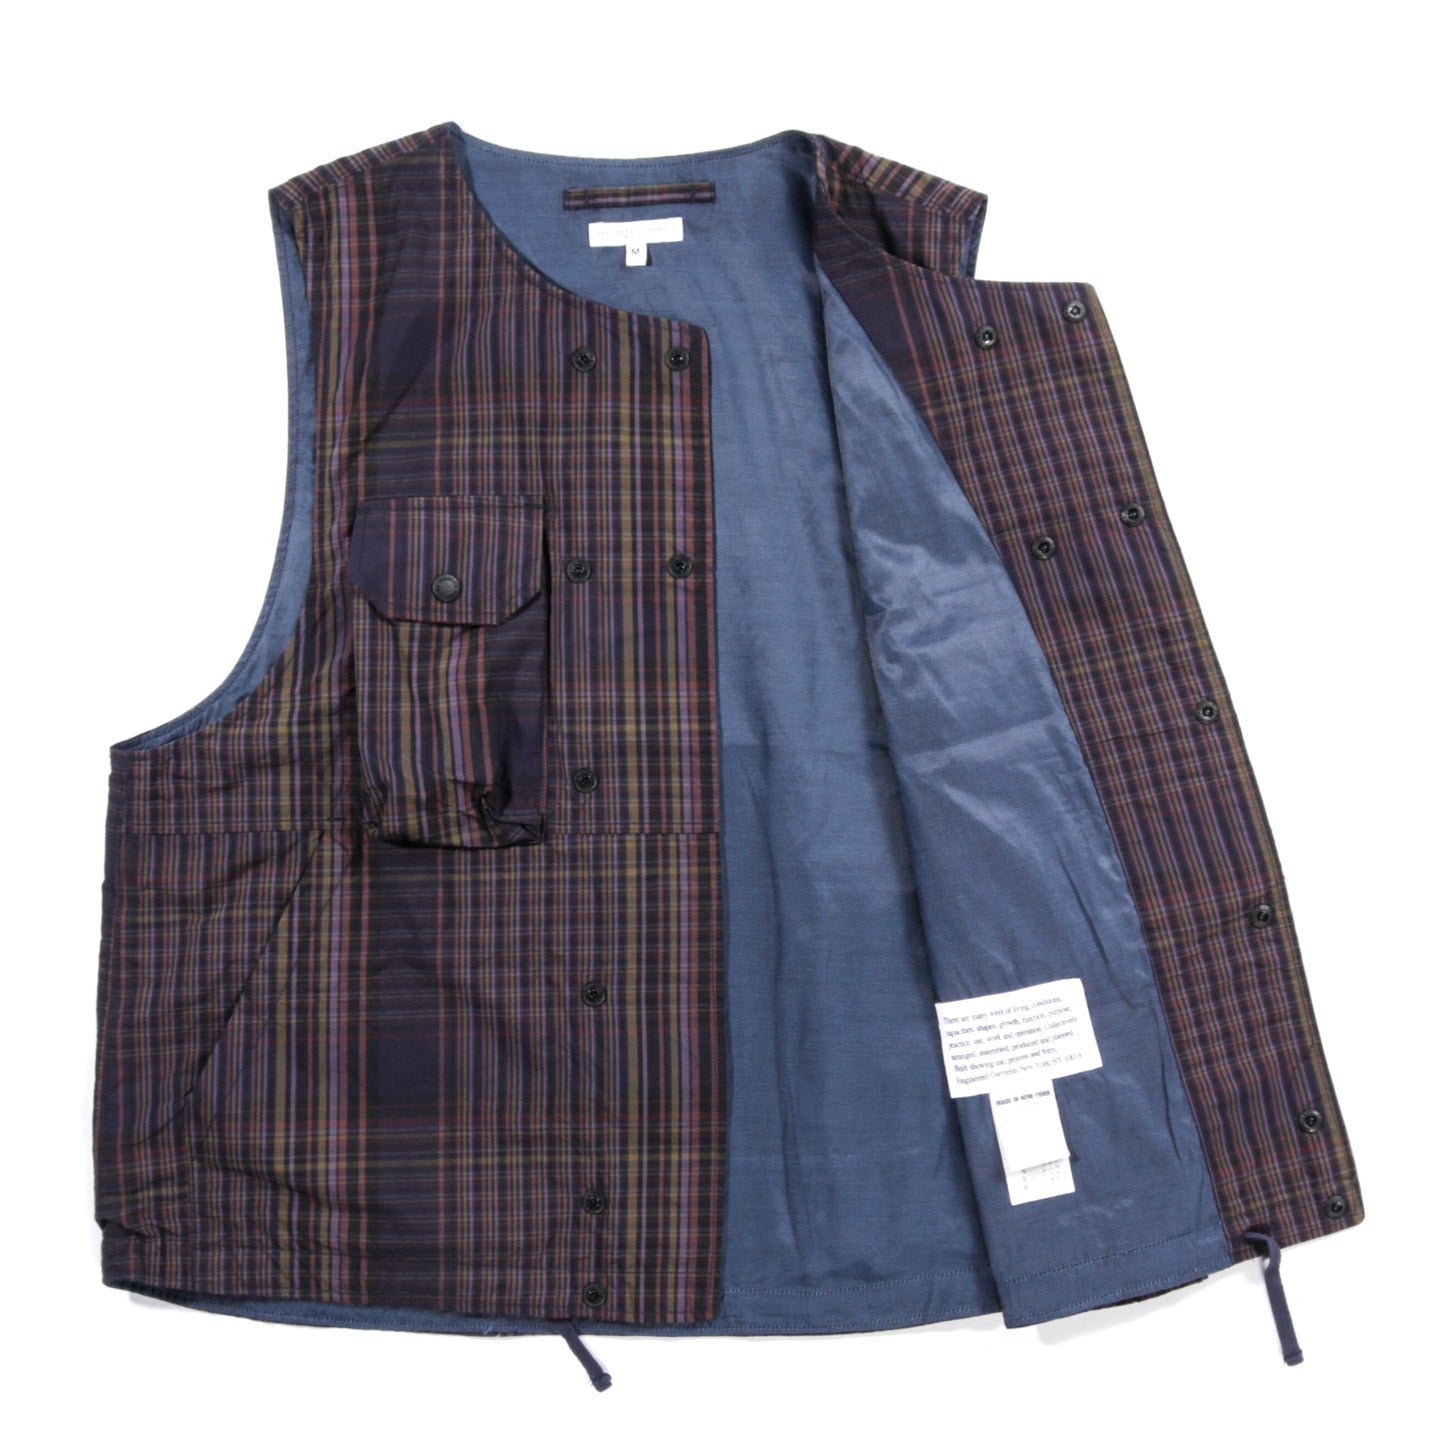 ENGINEERED GARMENTS 21AW COVER VEST - NYLON MICRO RIPSTOP